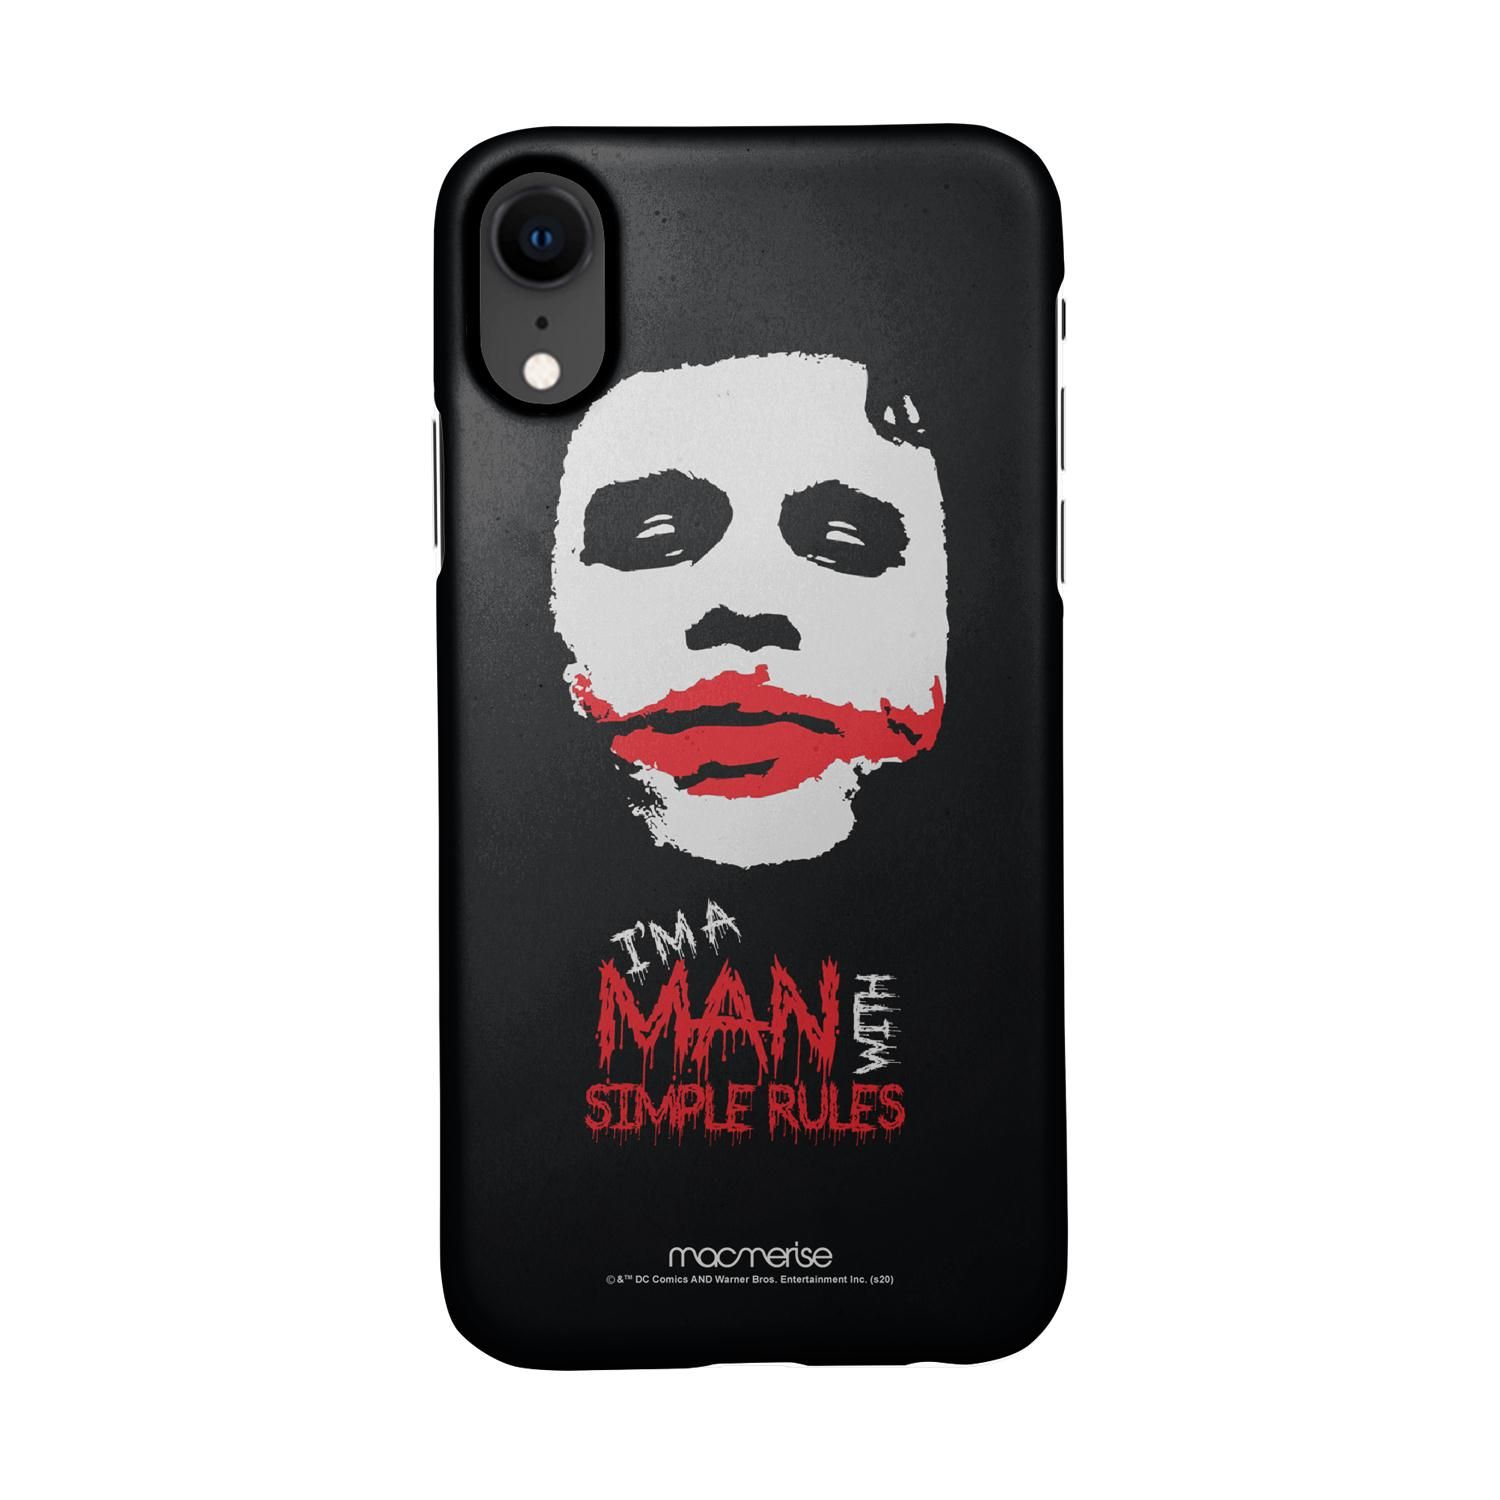 Buy Man With Simple Rules - Sleek Phone Case for iPhone XR Online